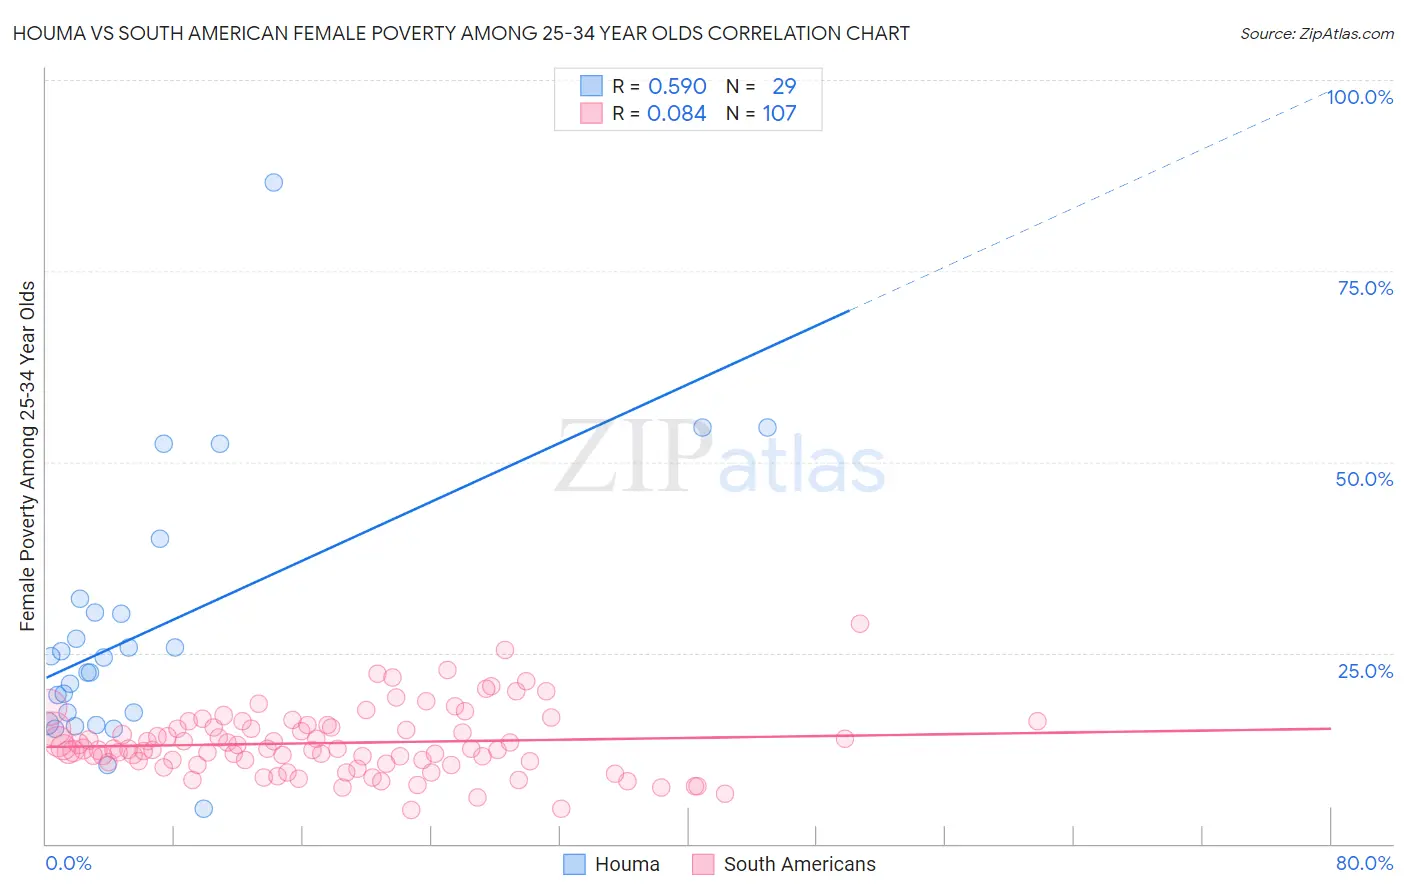 Houma vs South American Female Poverty Among 25-34 Year Olds